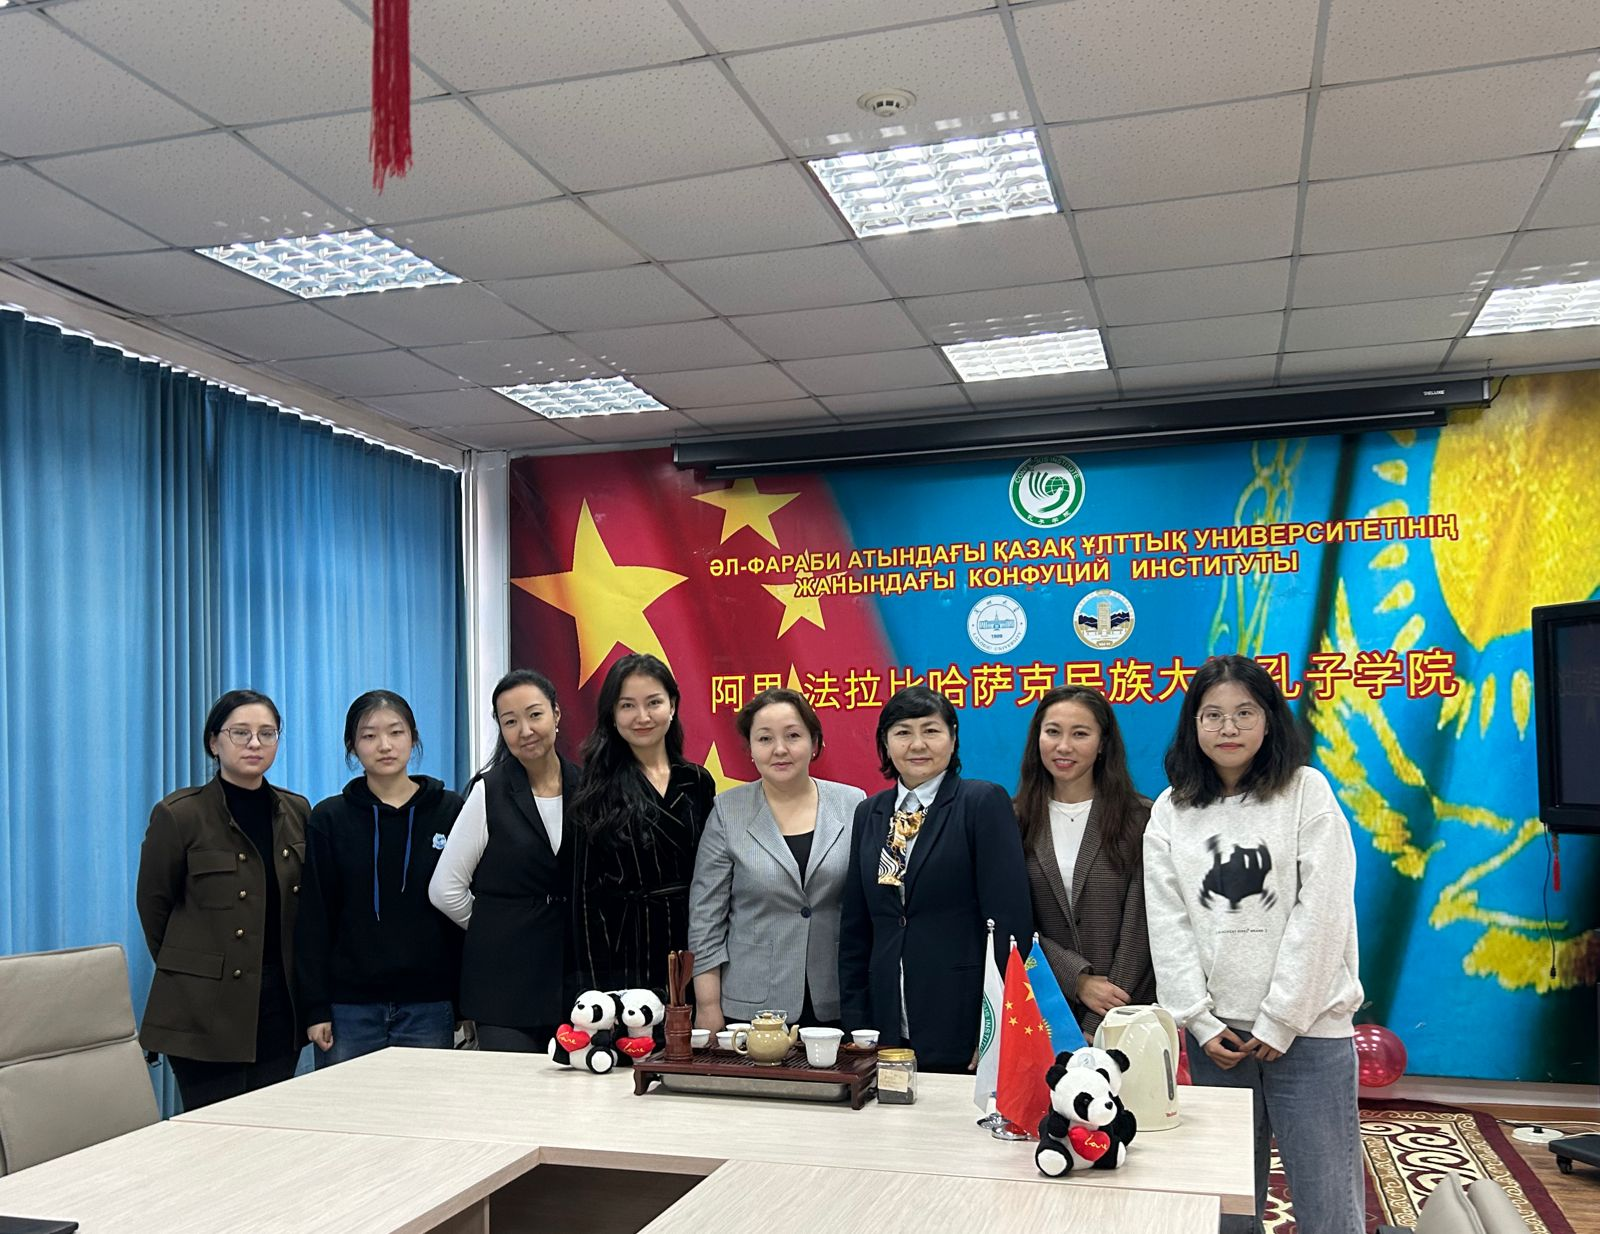 The event “Chinese Culture Day: Traditions and Heritage of the Chinese People”, held jointly with Chinese students within the framework of SDG 17 “Partnership for Sustainable Development”